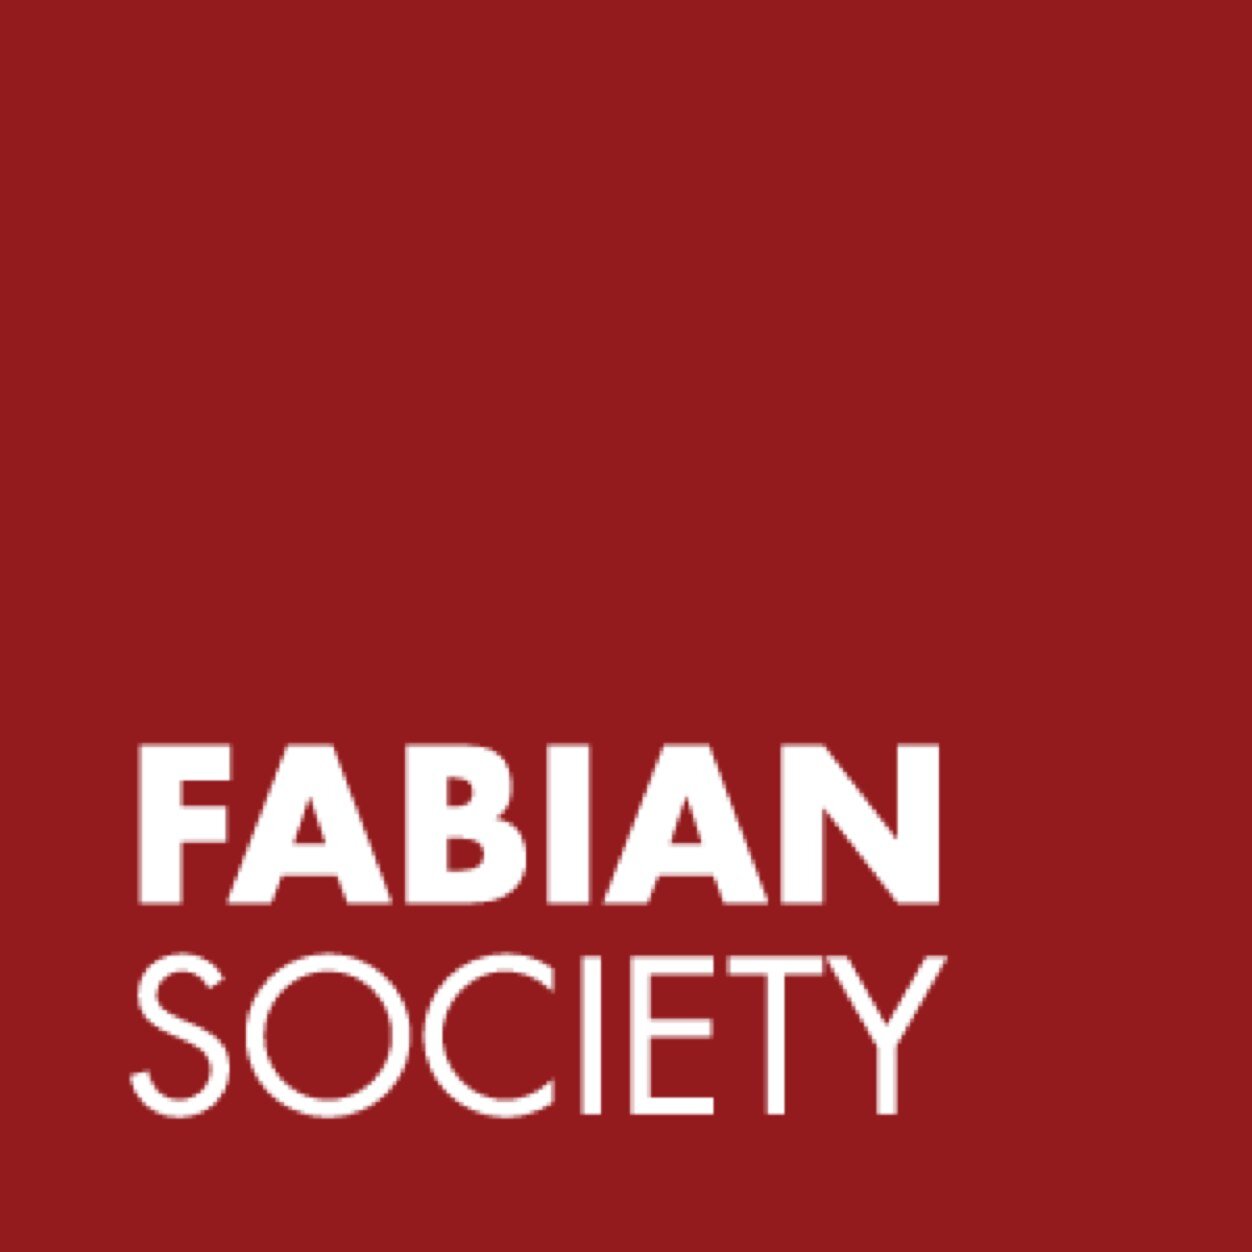 The Twitter account for the Surrey Fabian Society